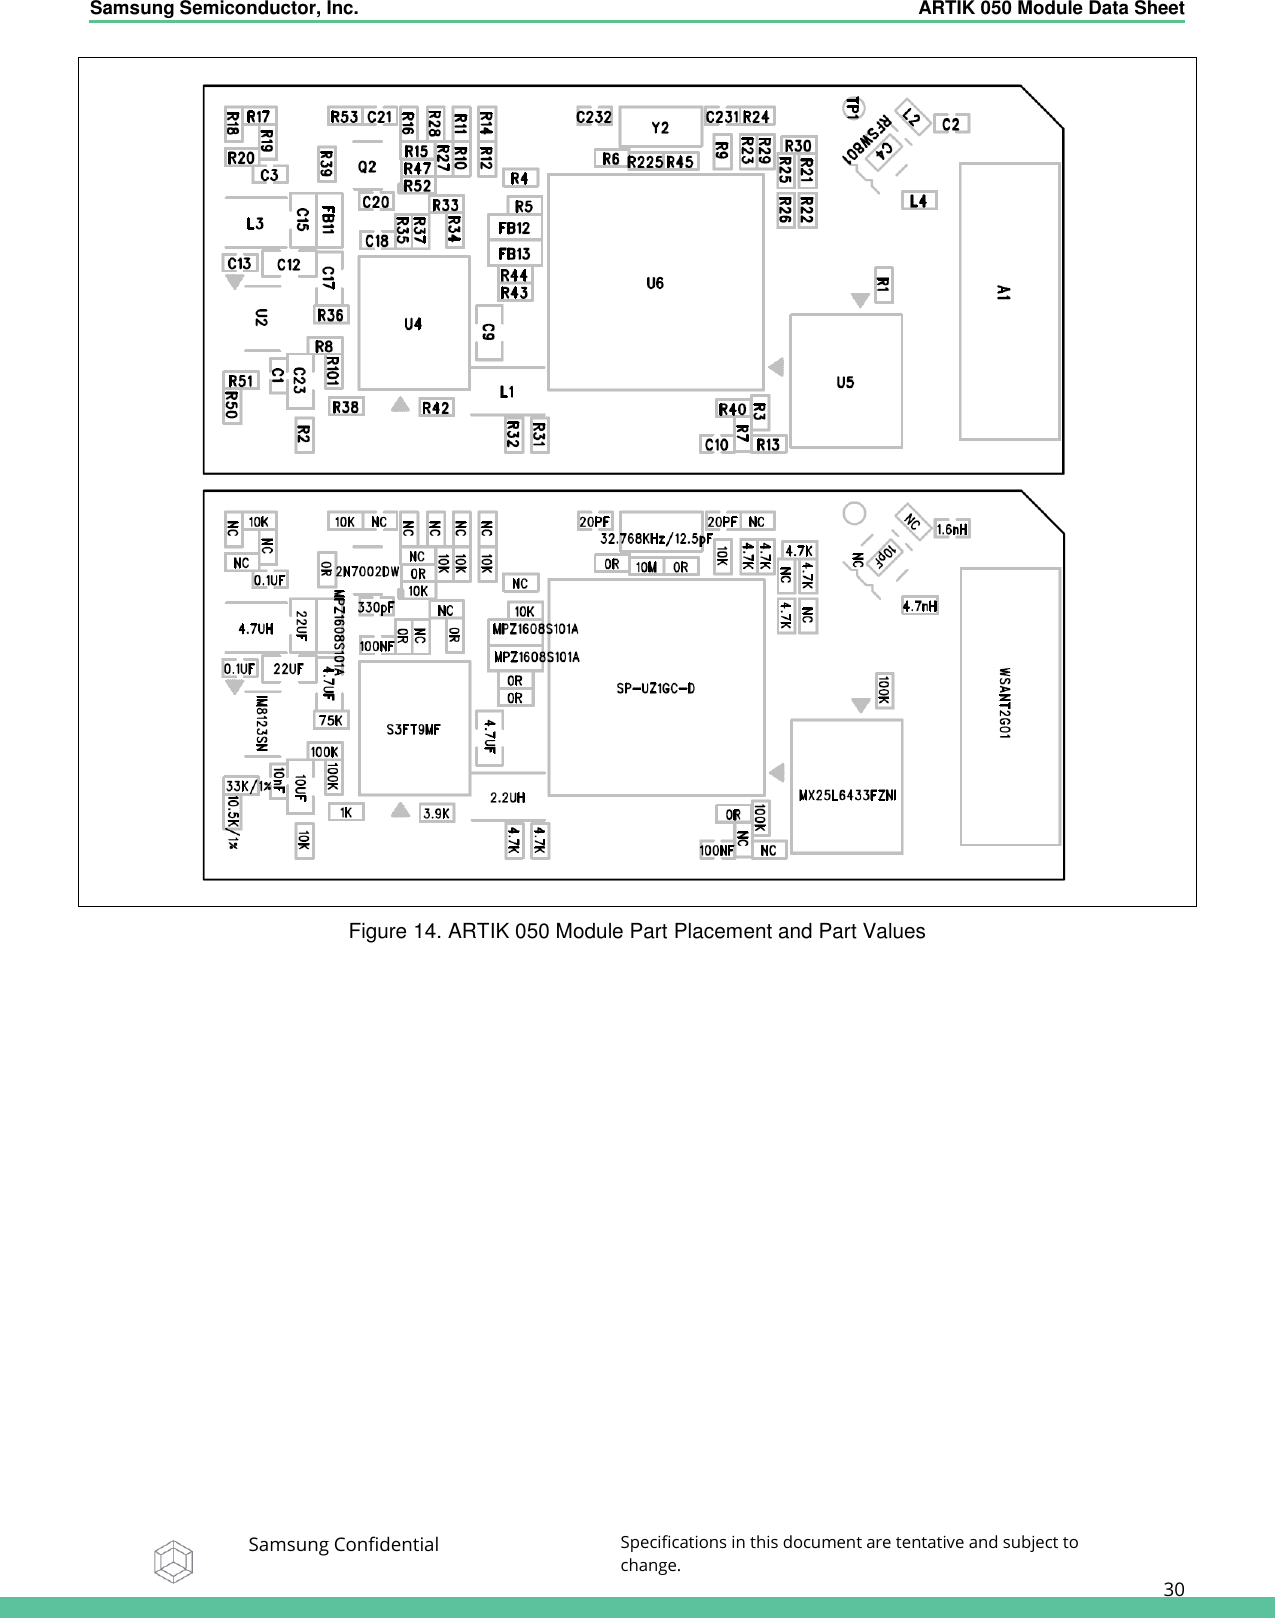 Samsung Semiconductor, Inc.  ARTIK 050 Module Data Sheet   Samsung Confidential Specifications in this document are tentative and subject to change.  30  Figure 14. ARTIK 050 Module Part Placement and Part Values 